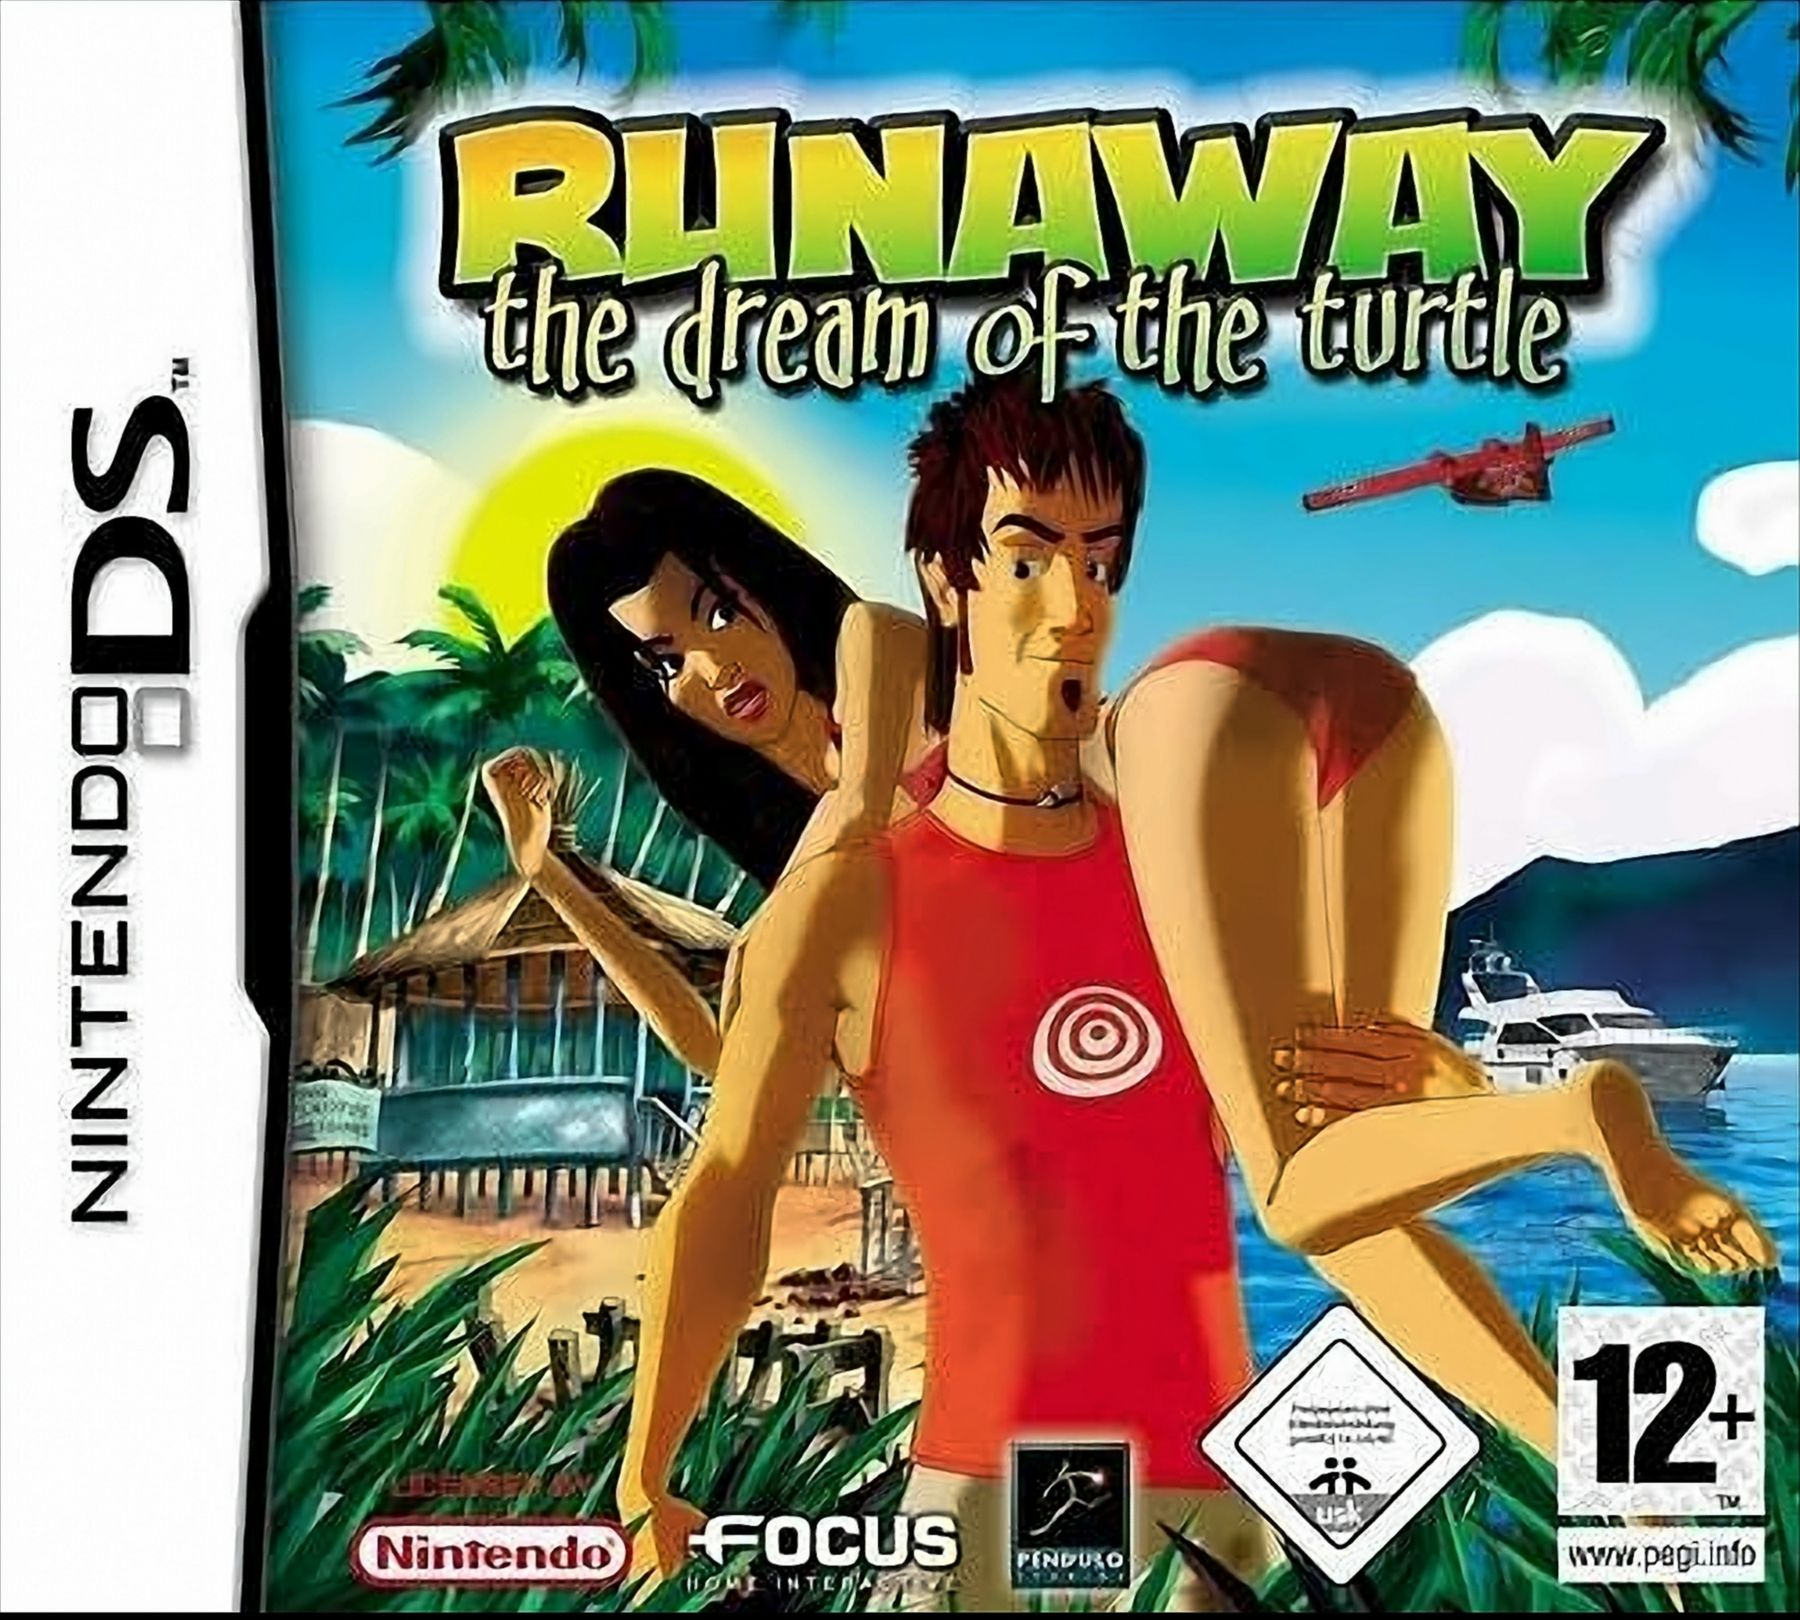 DS] The - Of Runaway - Dream 2 The [Nintendo Turtle